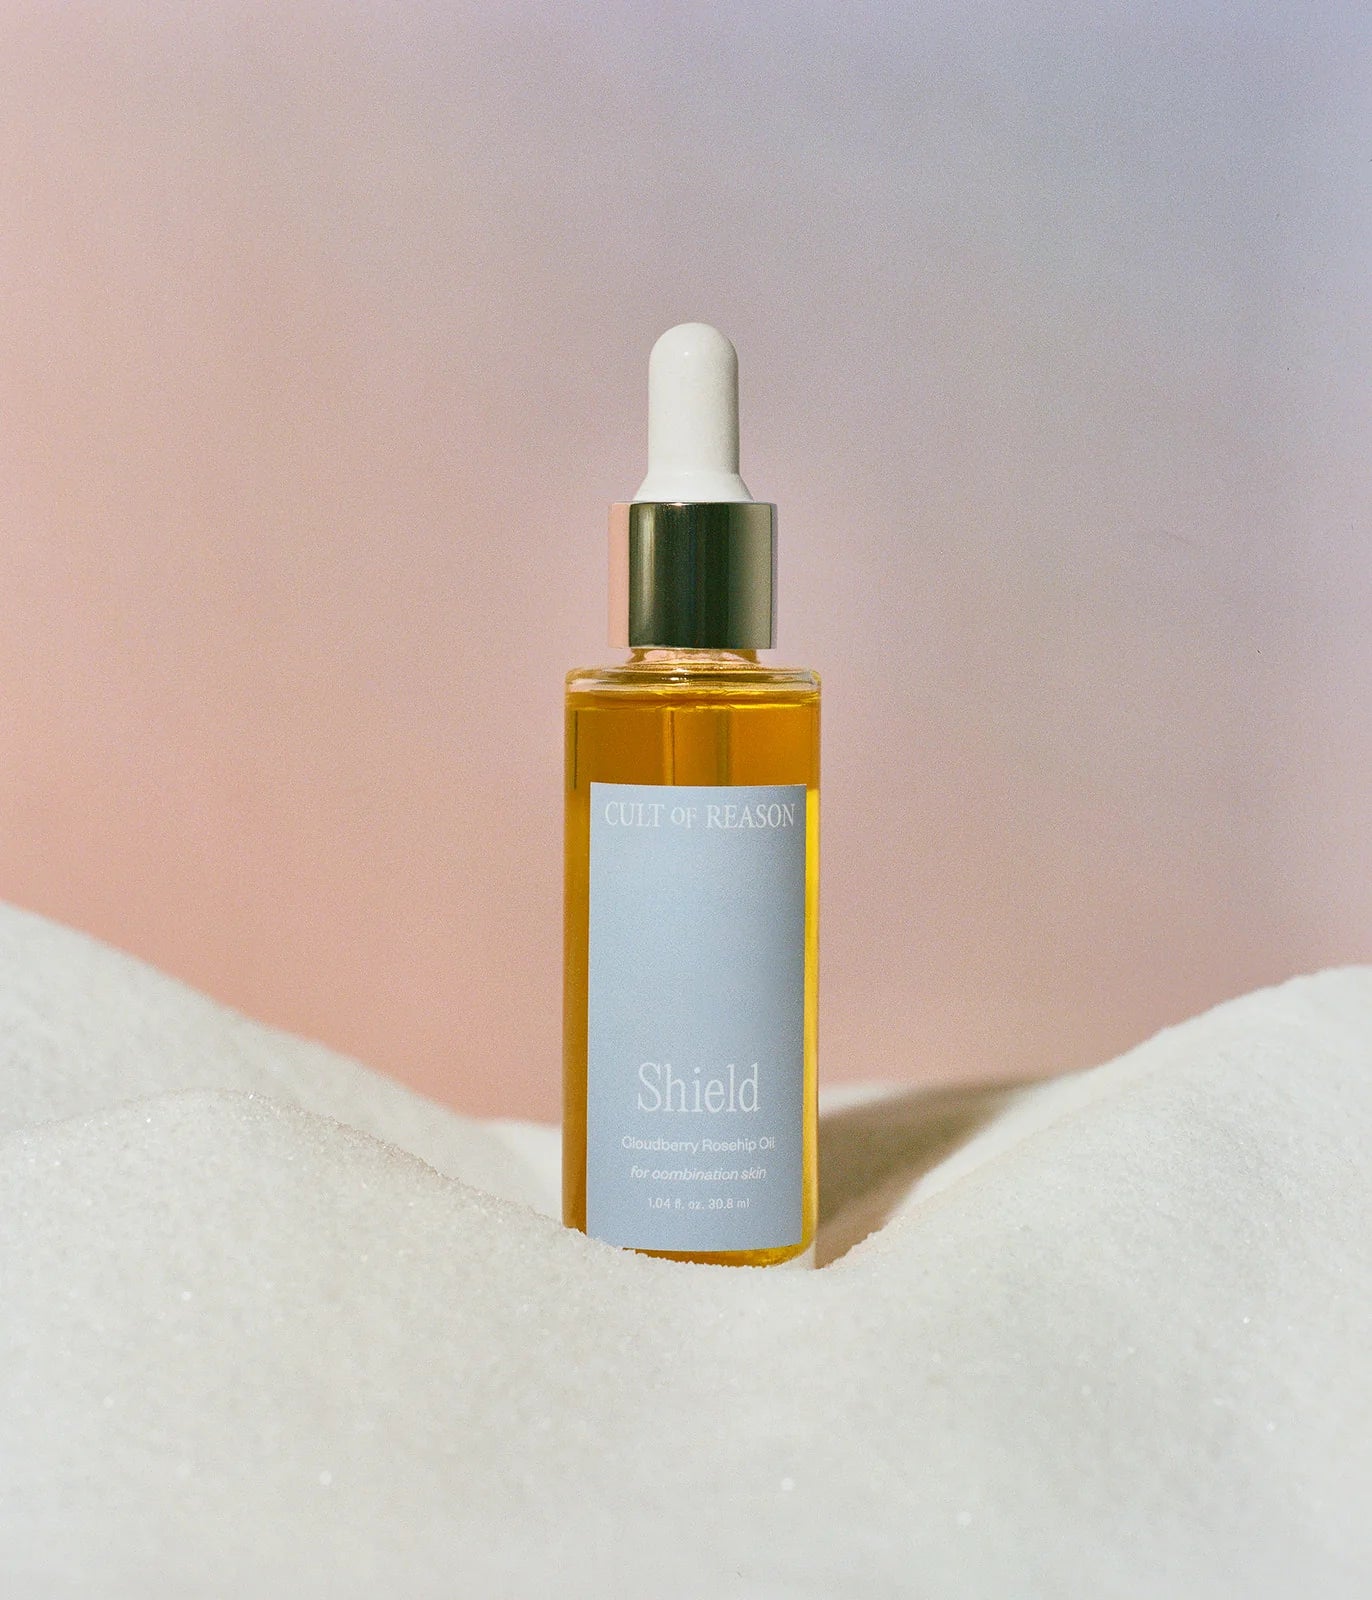 Picture of Cult of Reason Skincare's Anti-aging facial oil bottle with plant-based retinol with pink background